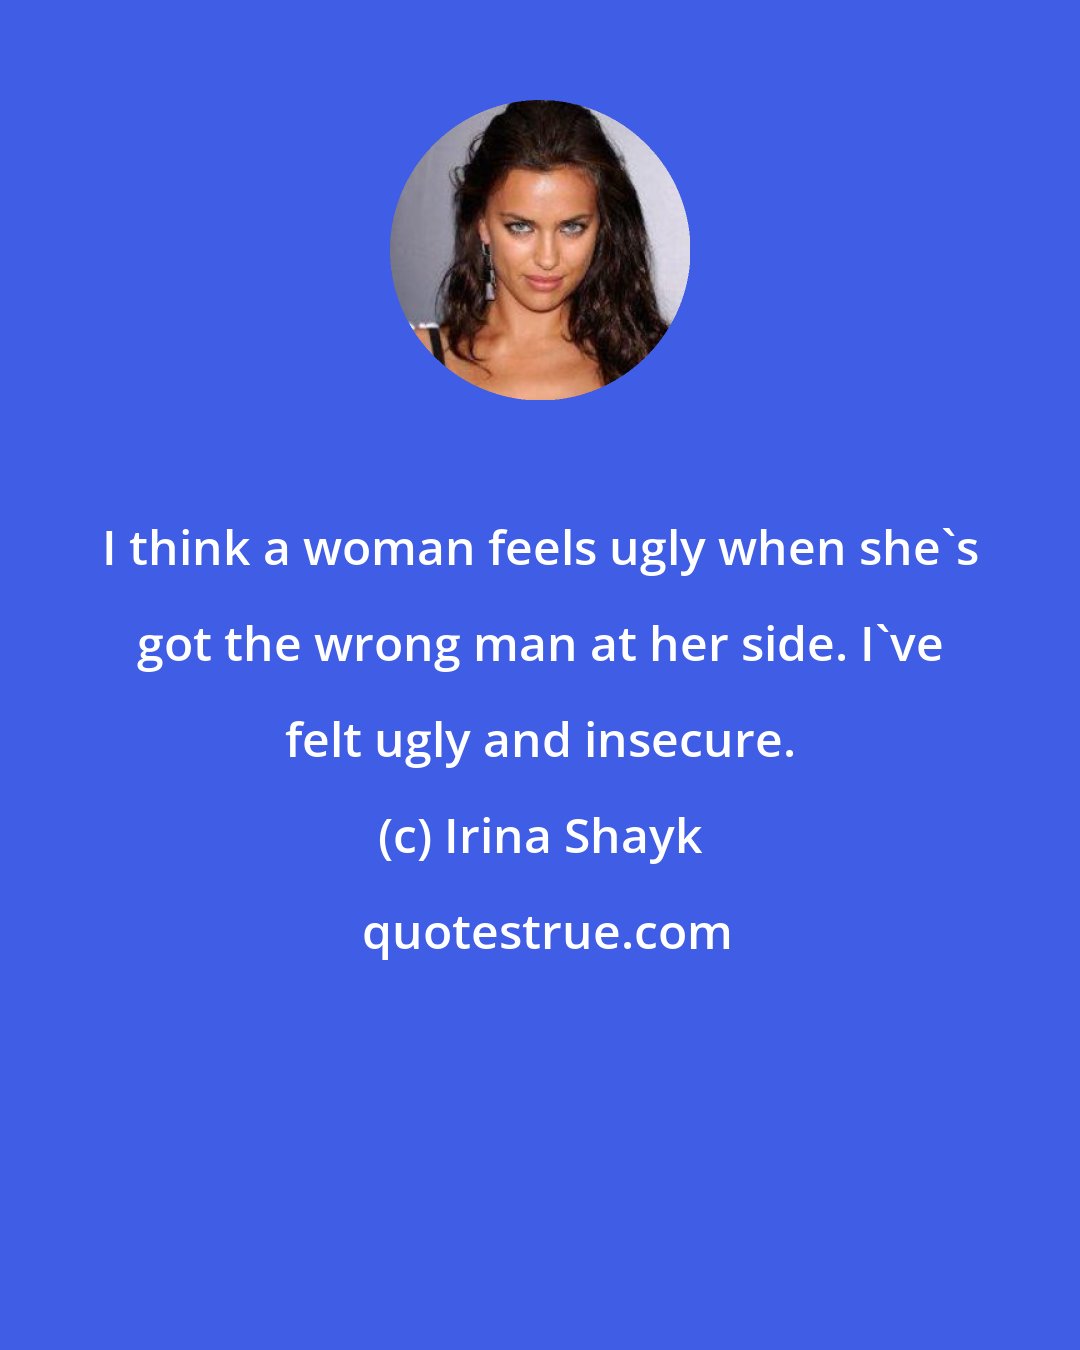 Irina Shayk: I think a woman feels ugly when she's got the wrong man at her side. I've felt ugly and insecure.